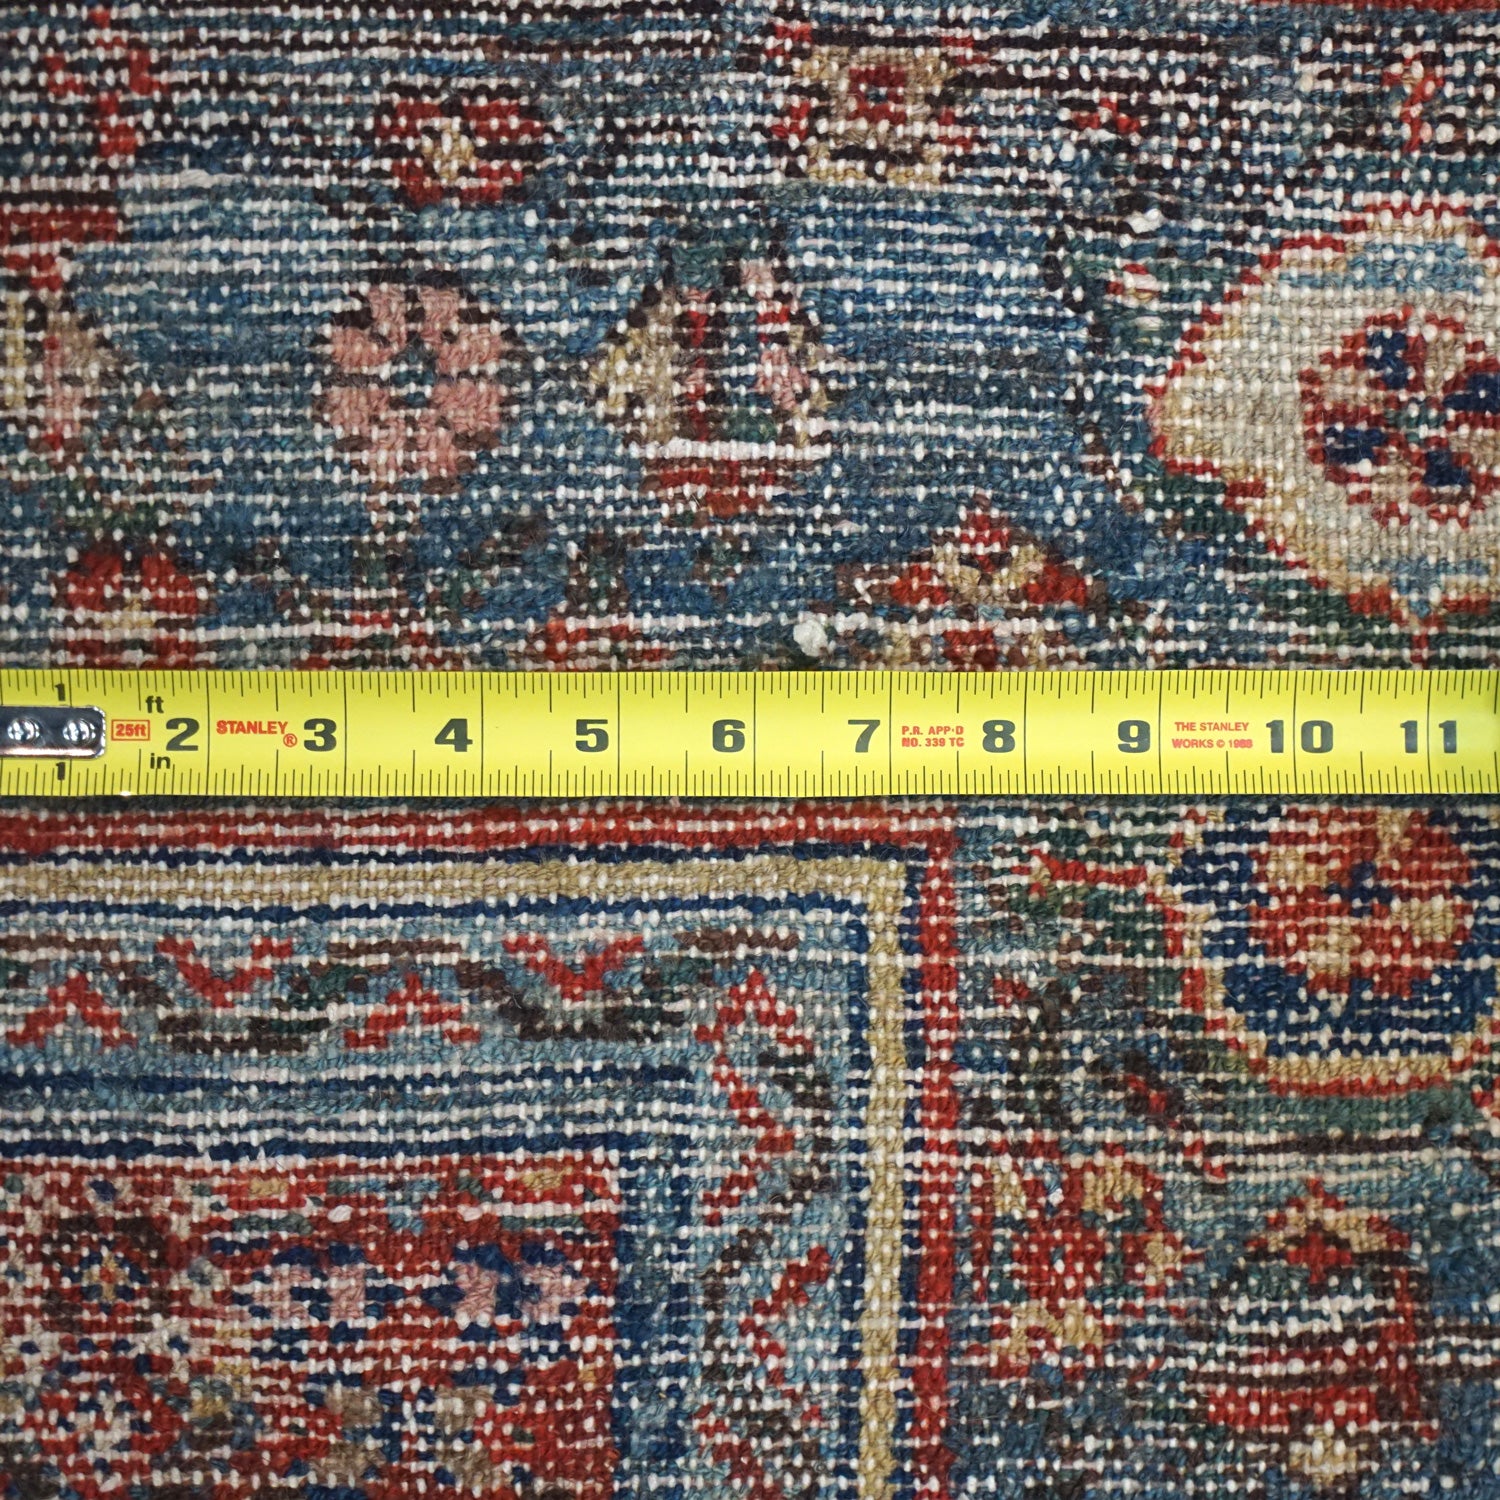 Antique N.W. Persian Handwoven Tribal Rug, JF7944